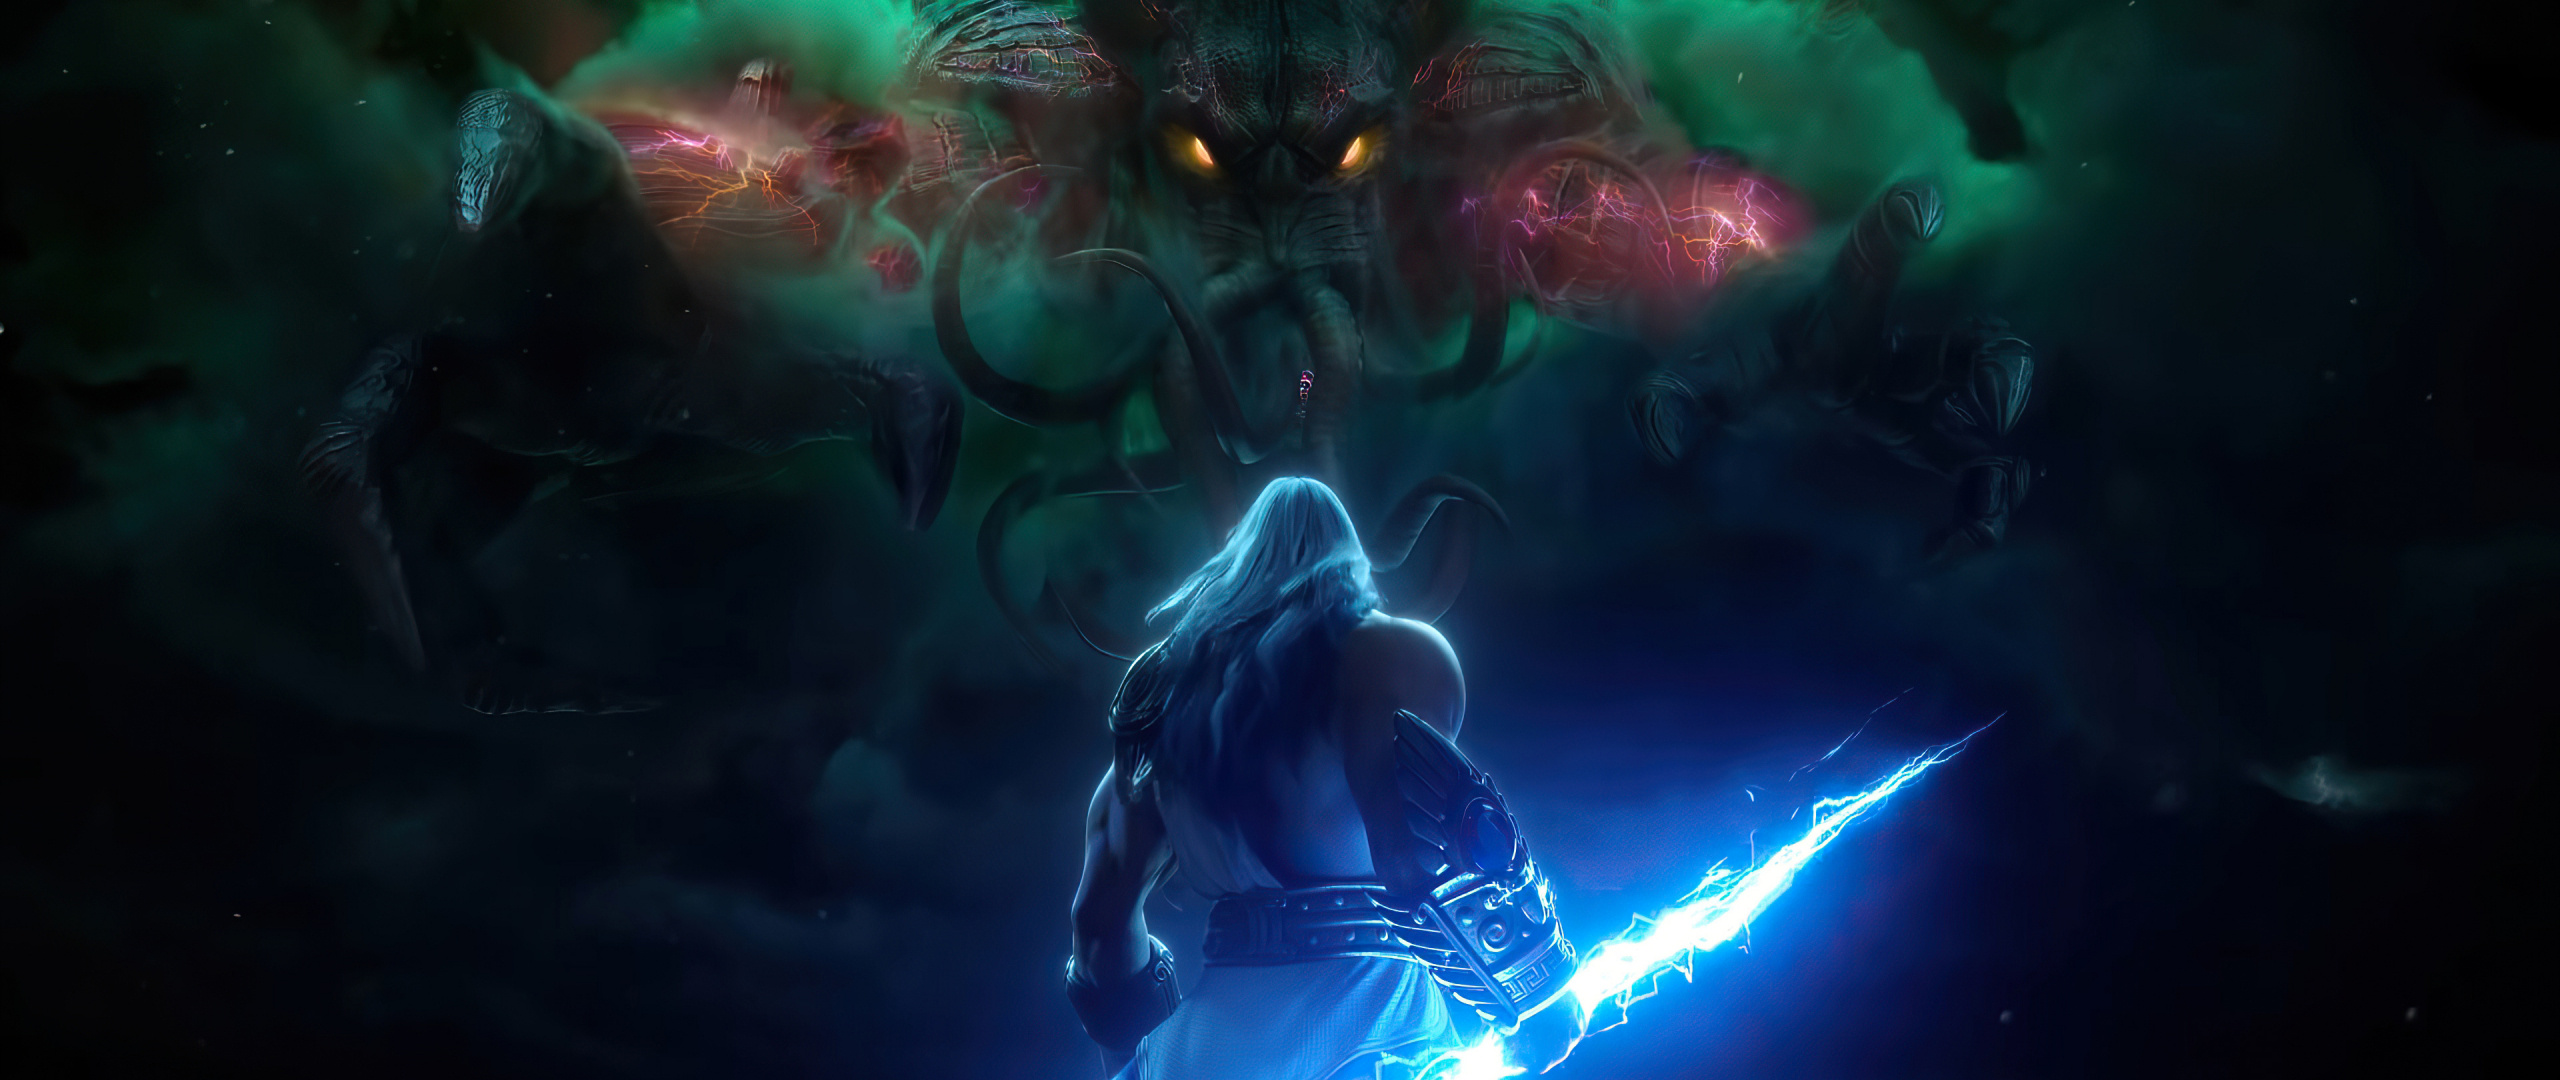 Zeus: The duel between the Ancient God Cthulhu and the God of the Greek Pantheon. 2560x1080 Dual Screen Wallpaper.